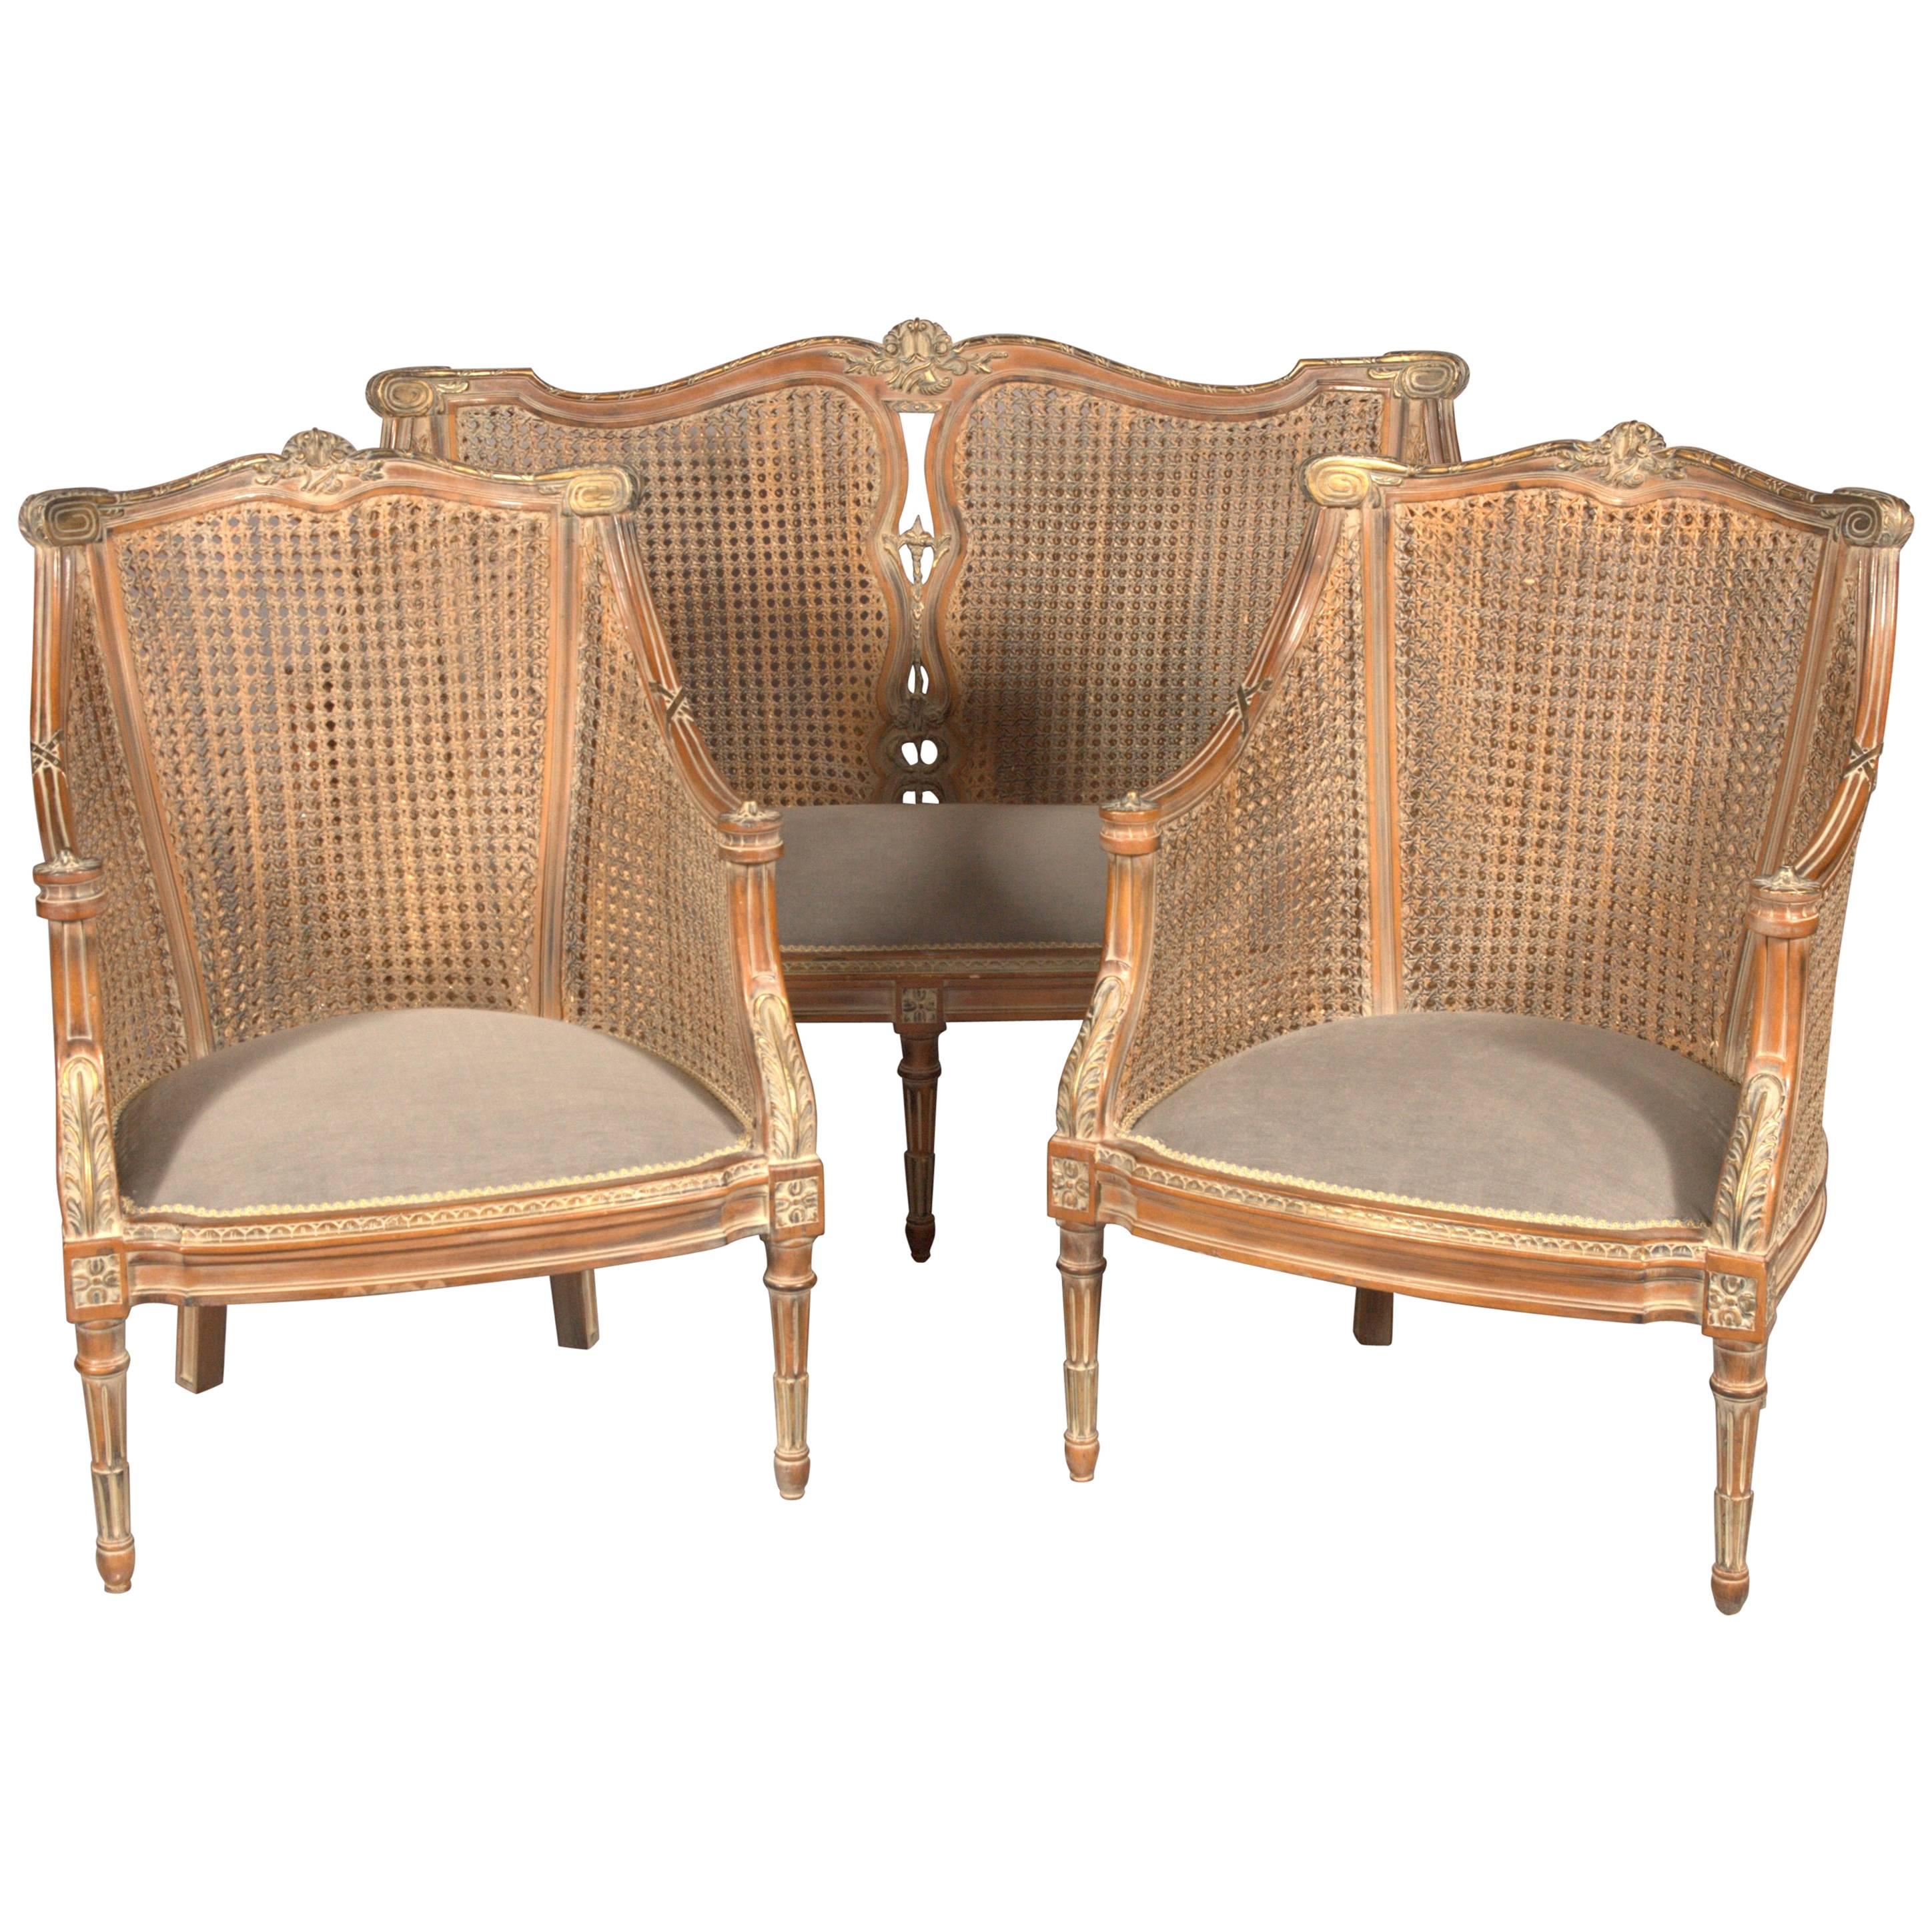 20th Century Elegant Chair Set in English Style, Carved and Colored Beechwood